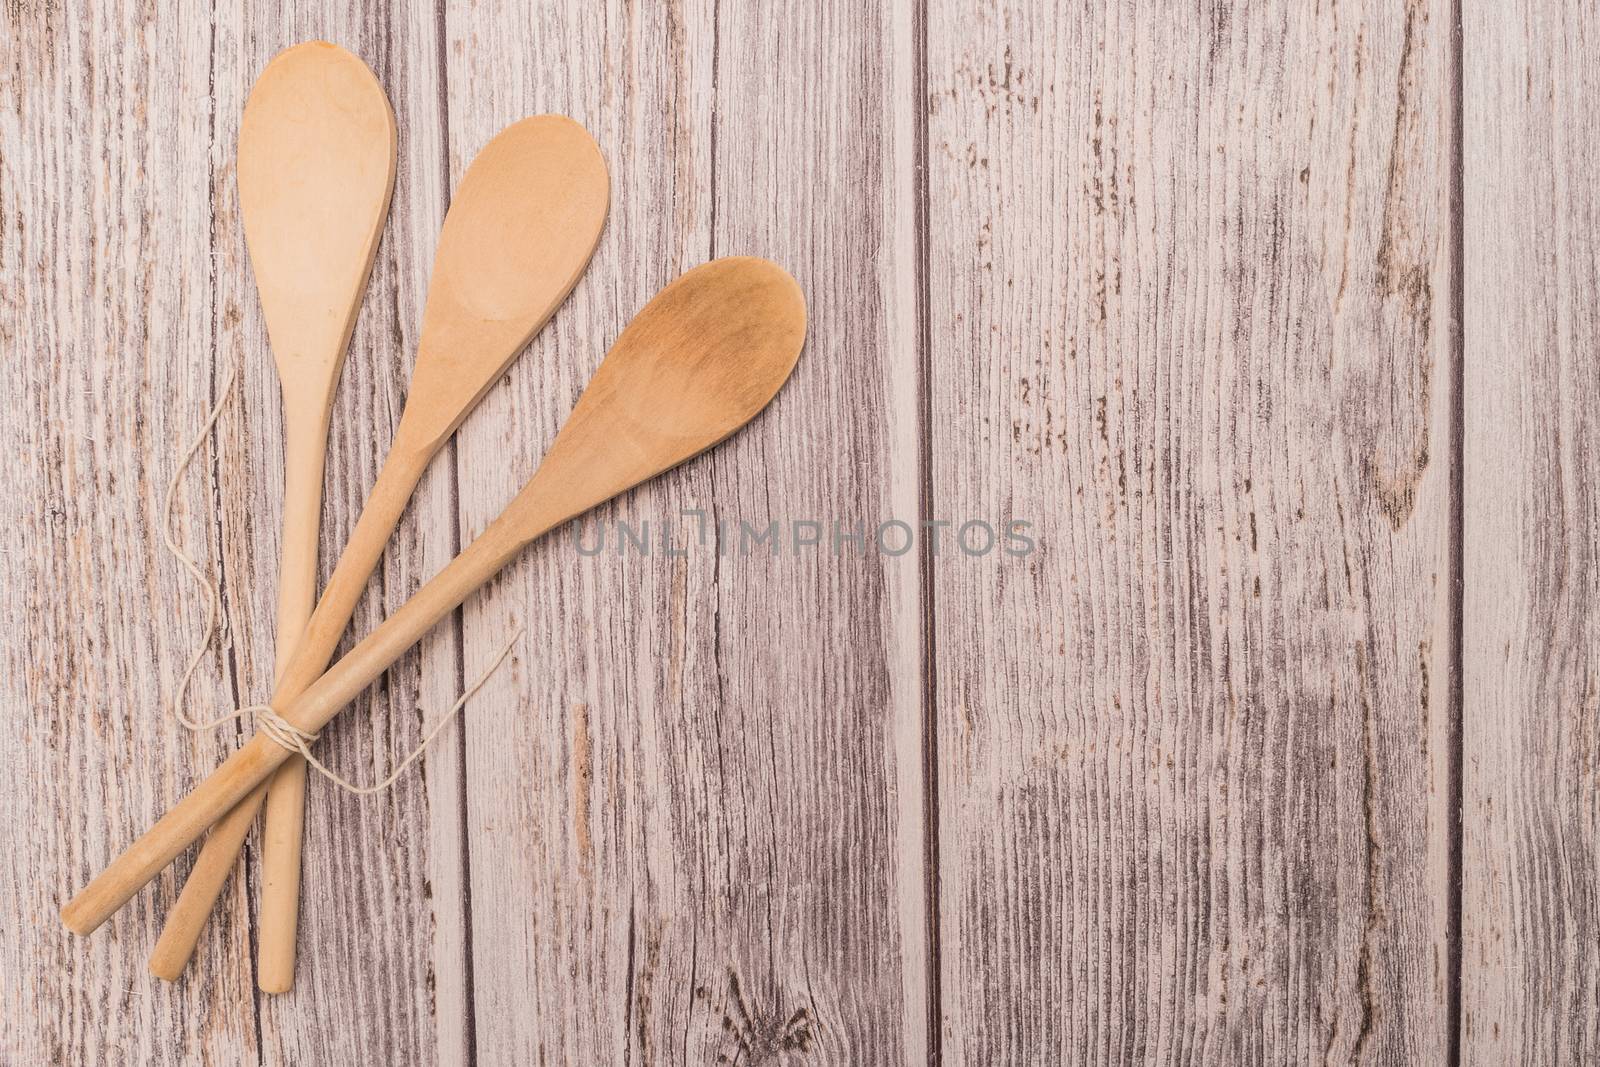 Wooden spoon tied up with a ribbon on rustic background by AnaMarques